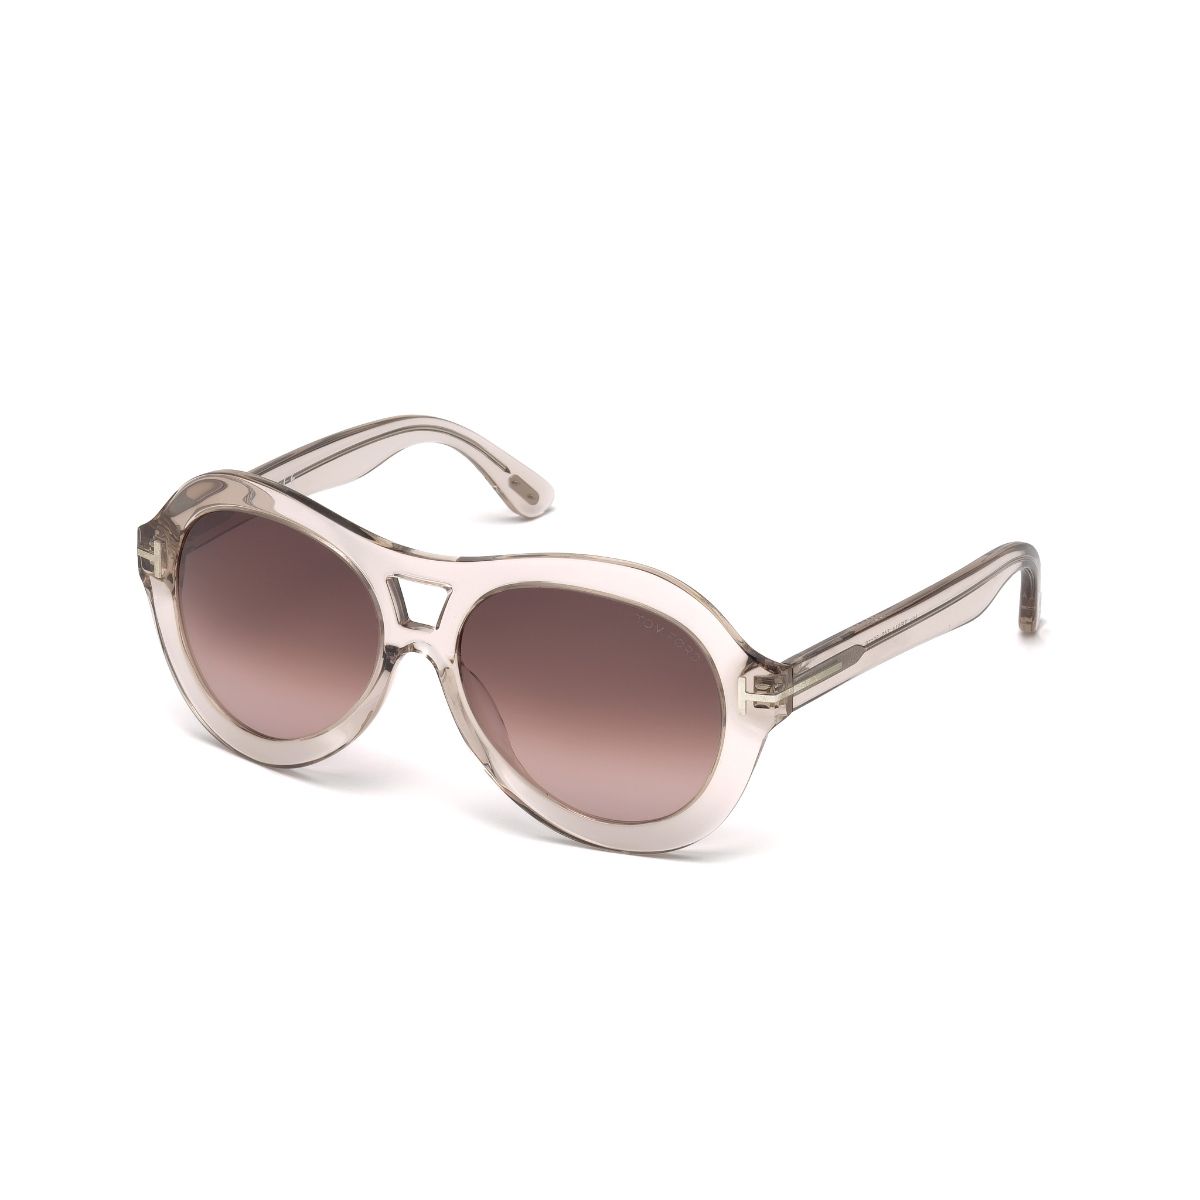 Tom Ford FT0514 56 74s Iconic Oval Shapes In Premium Acetate Sunglasses:  Buy Tom Ford FT0514 56 74s Iconic Oval Shapes In Premium Acetate Sunglasses  Online at Best Price in India | Nykaa